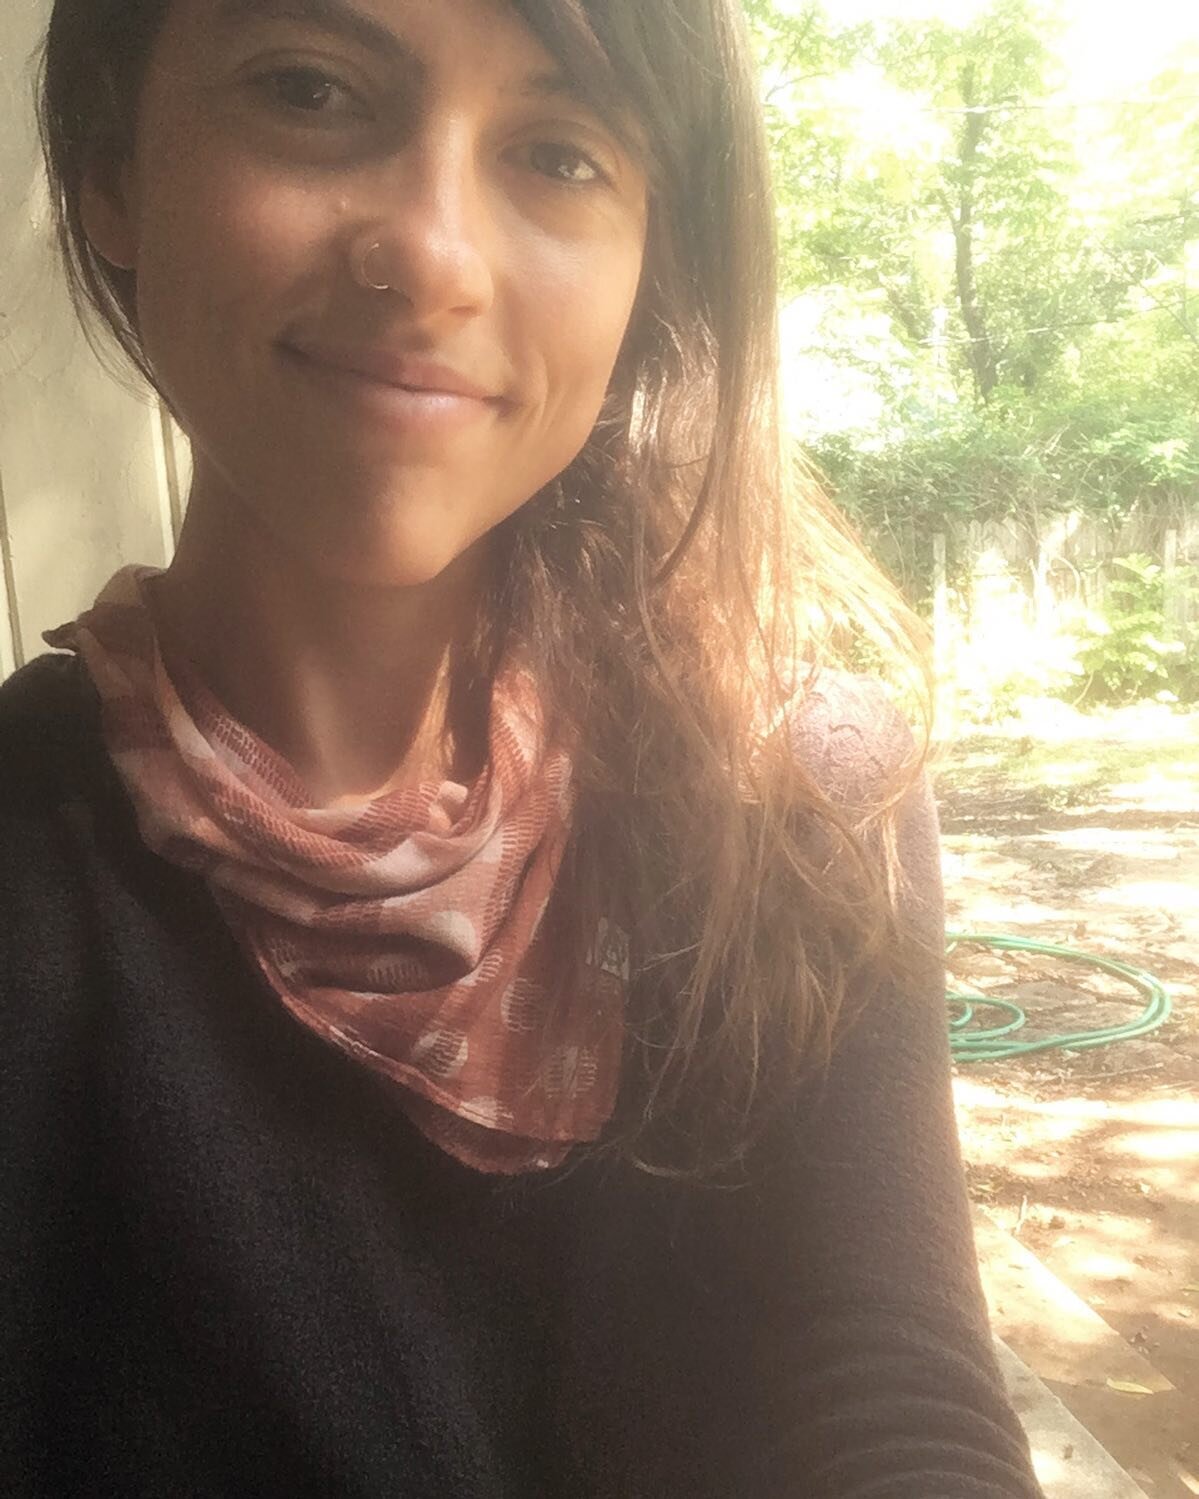 This was going to be a #fridayintroduction but, no surprise, it&rsquo;s coming in a bit late 🙃

So hi, hello there - I&rsquo;m so happy to be getting to know you - I&rsquo;m Jen an integrative health practitioner in Austin. I&rsquo;ve got two wonder